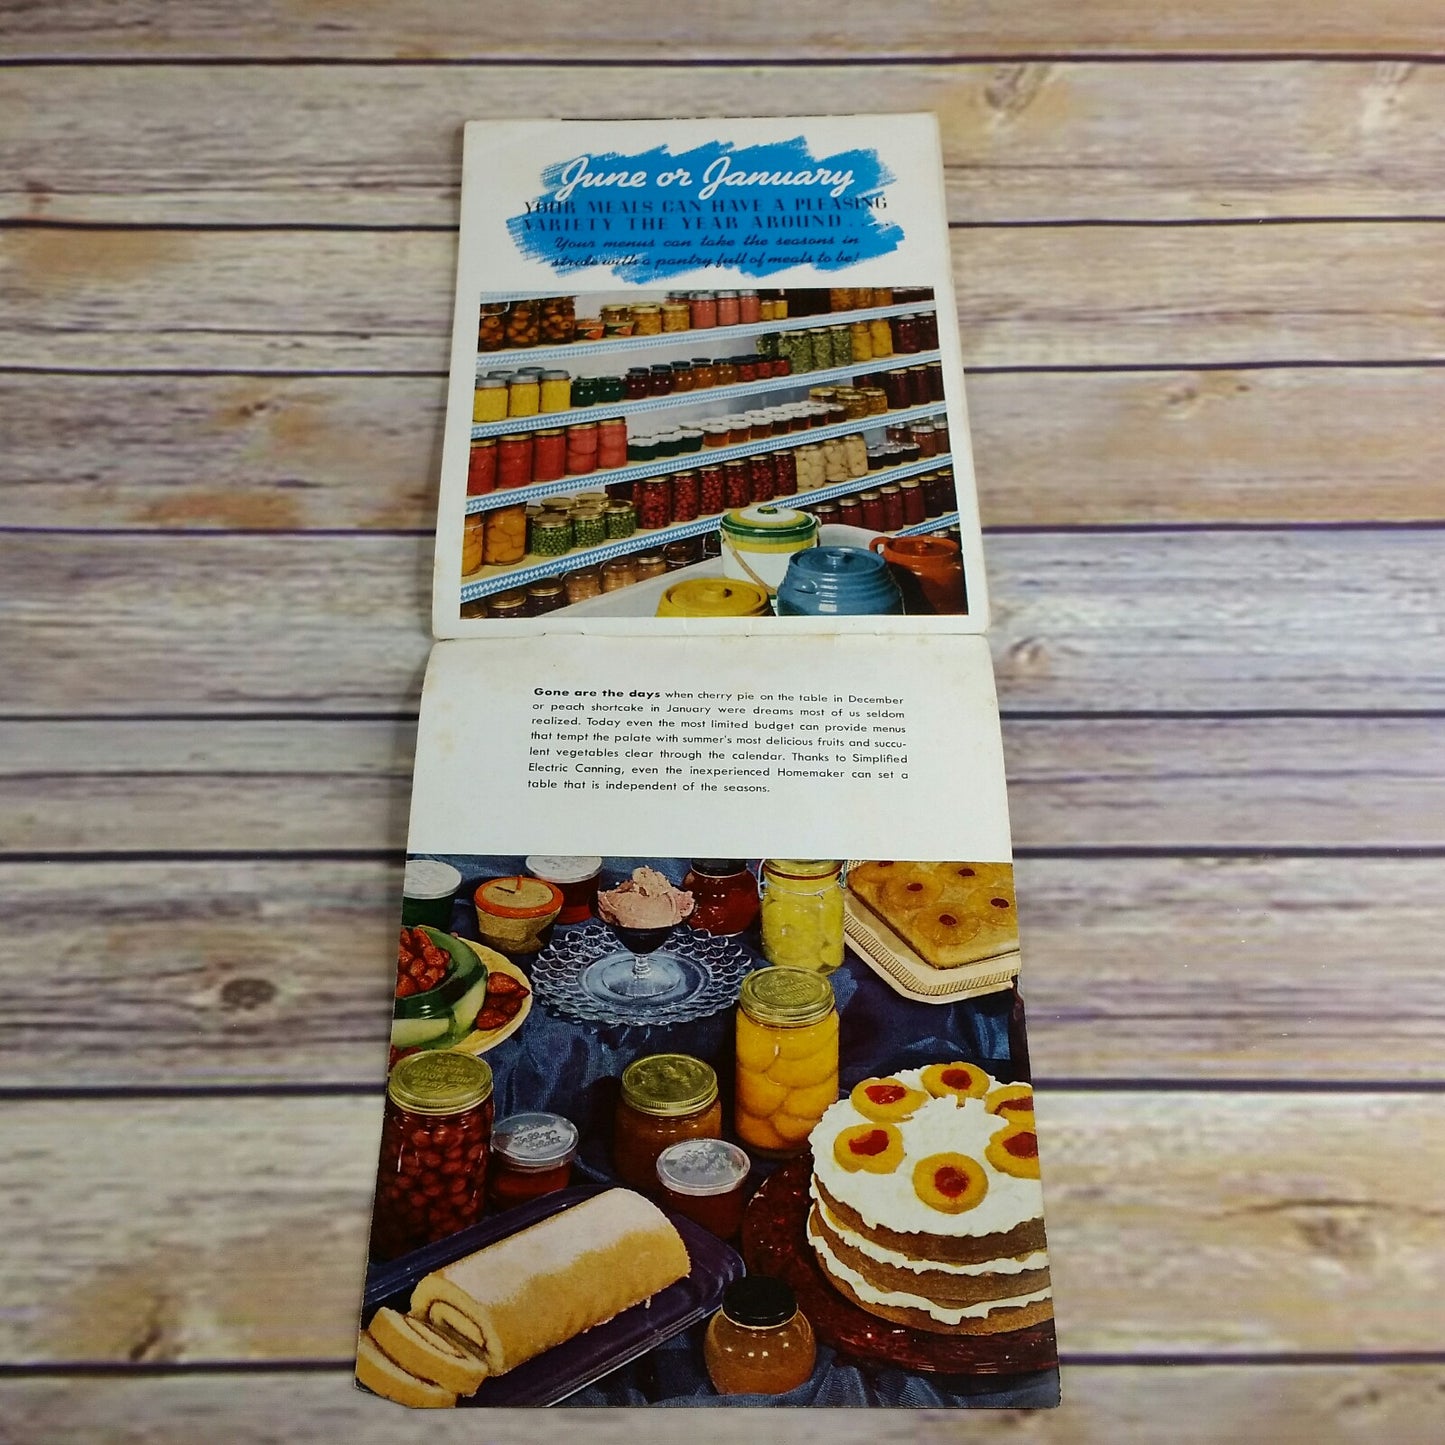 Vintage Hotpoint Electric Cooking and Home Canning Book Home Economics Cookbook Recipes Booklet Edison General Electric - At Grandma's Table